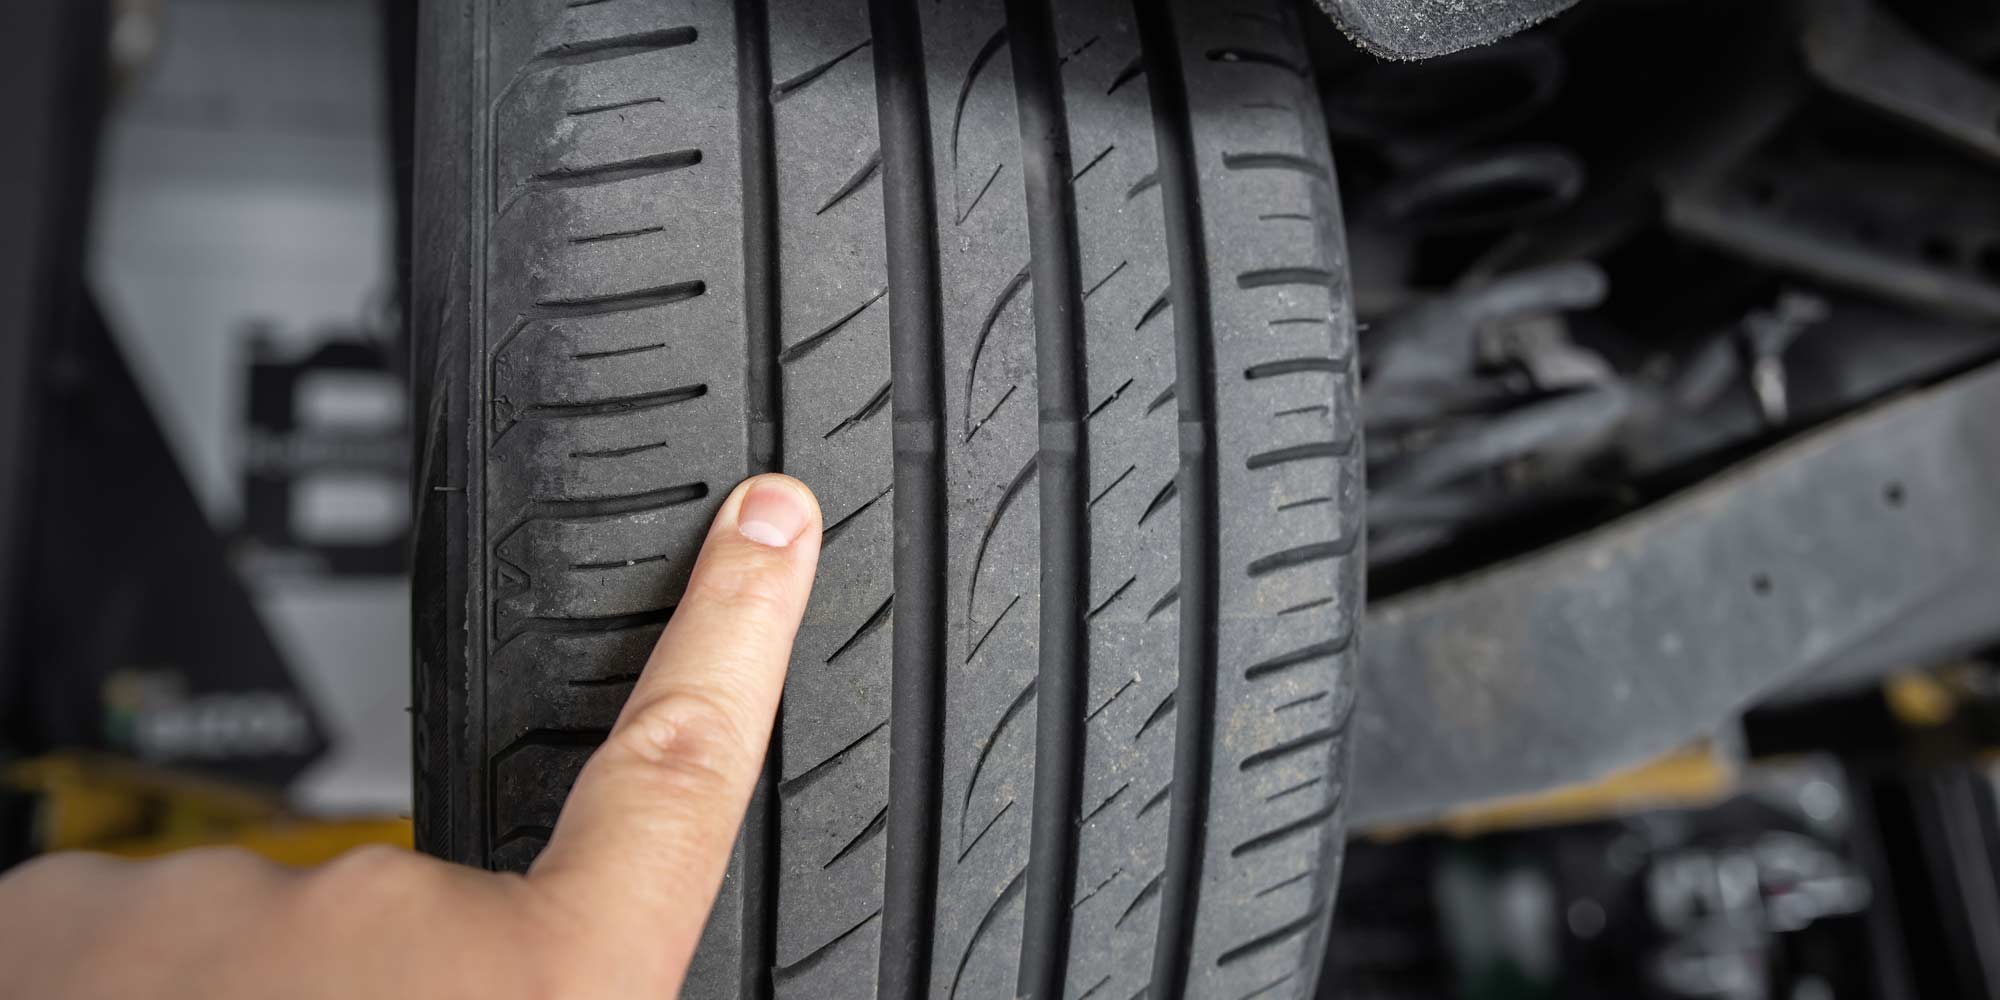 How to Read Tire Wear Patterns & Improve Your Safety